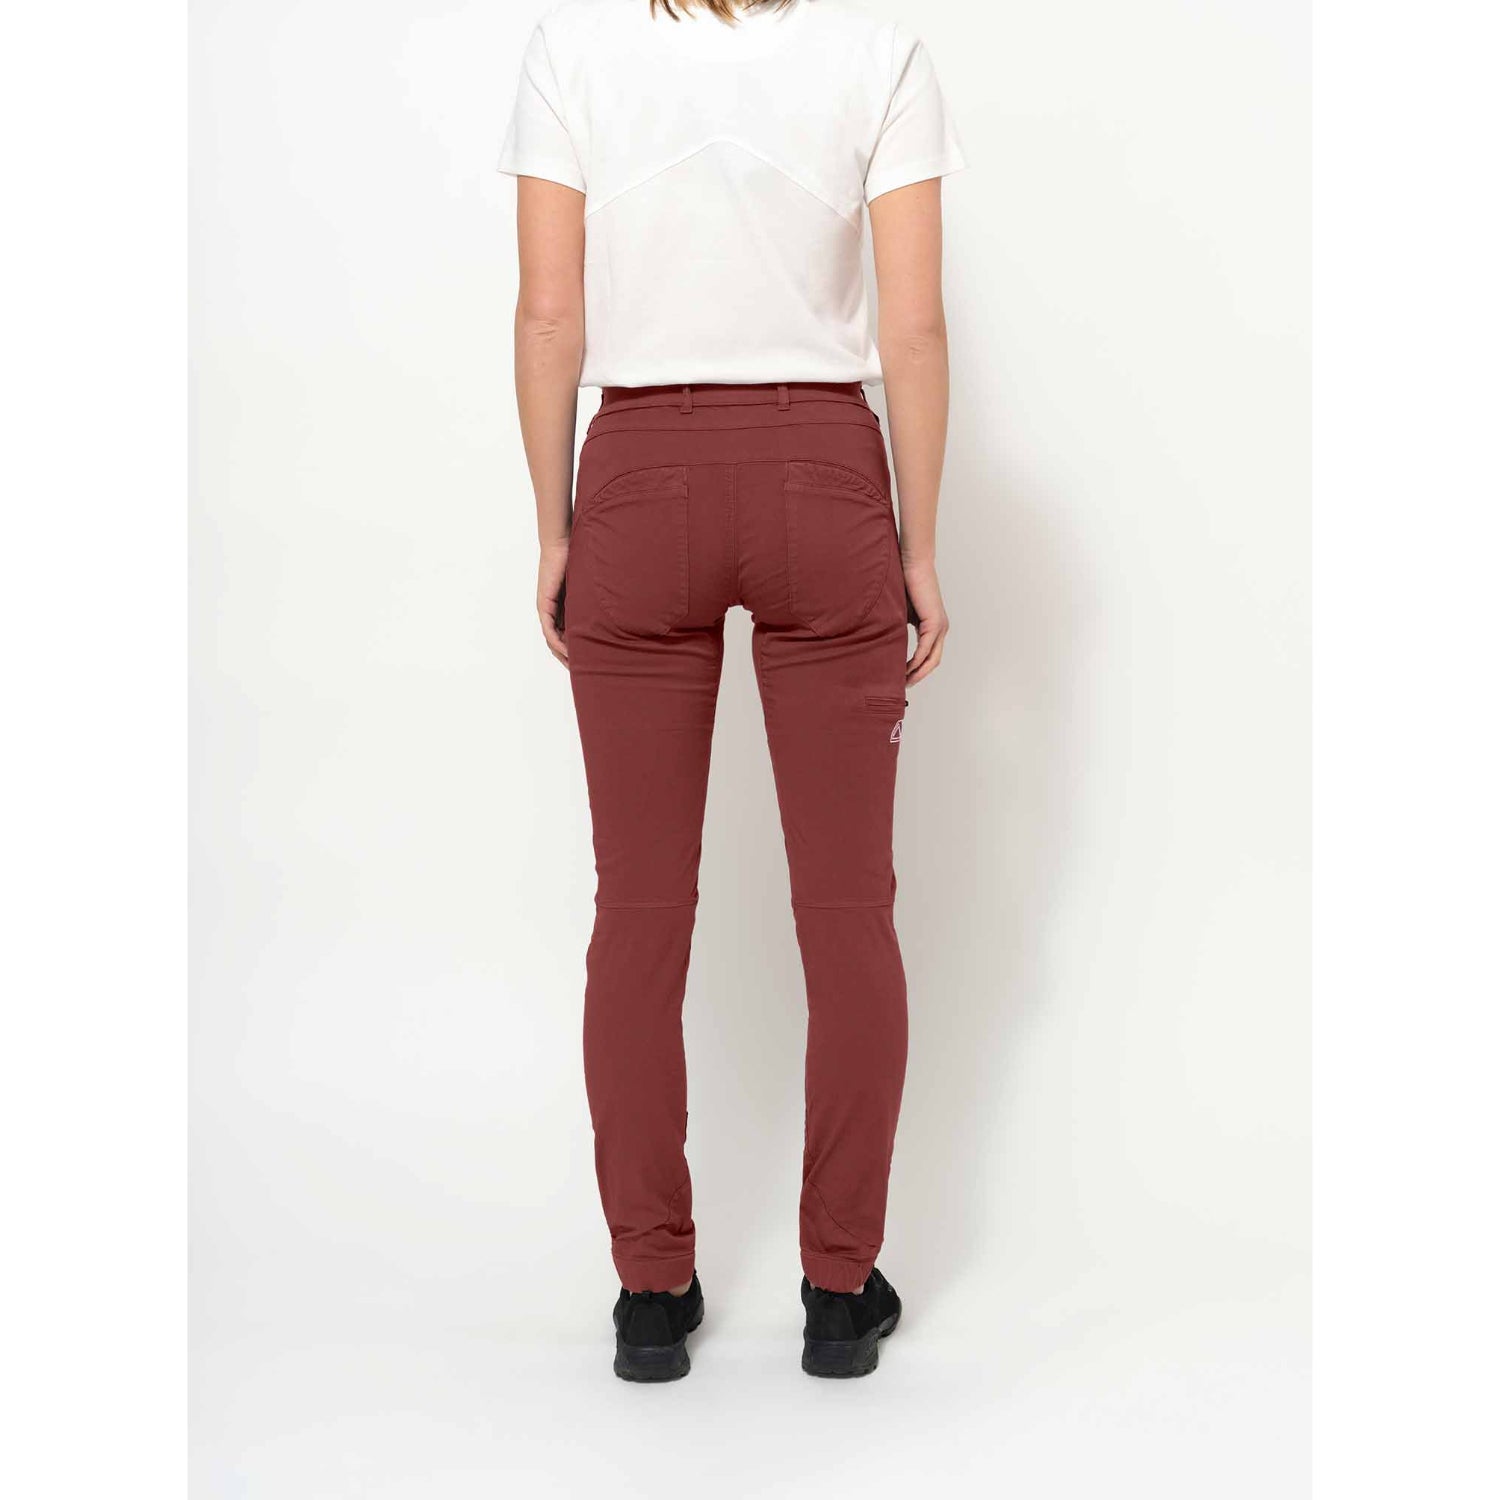 Looking For Wild Laila Peak Pant - Womens (Madder Brown)